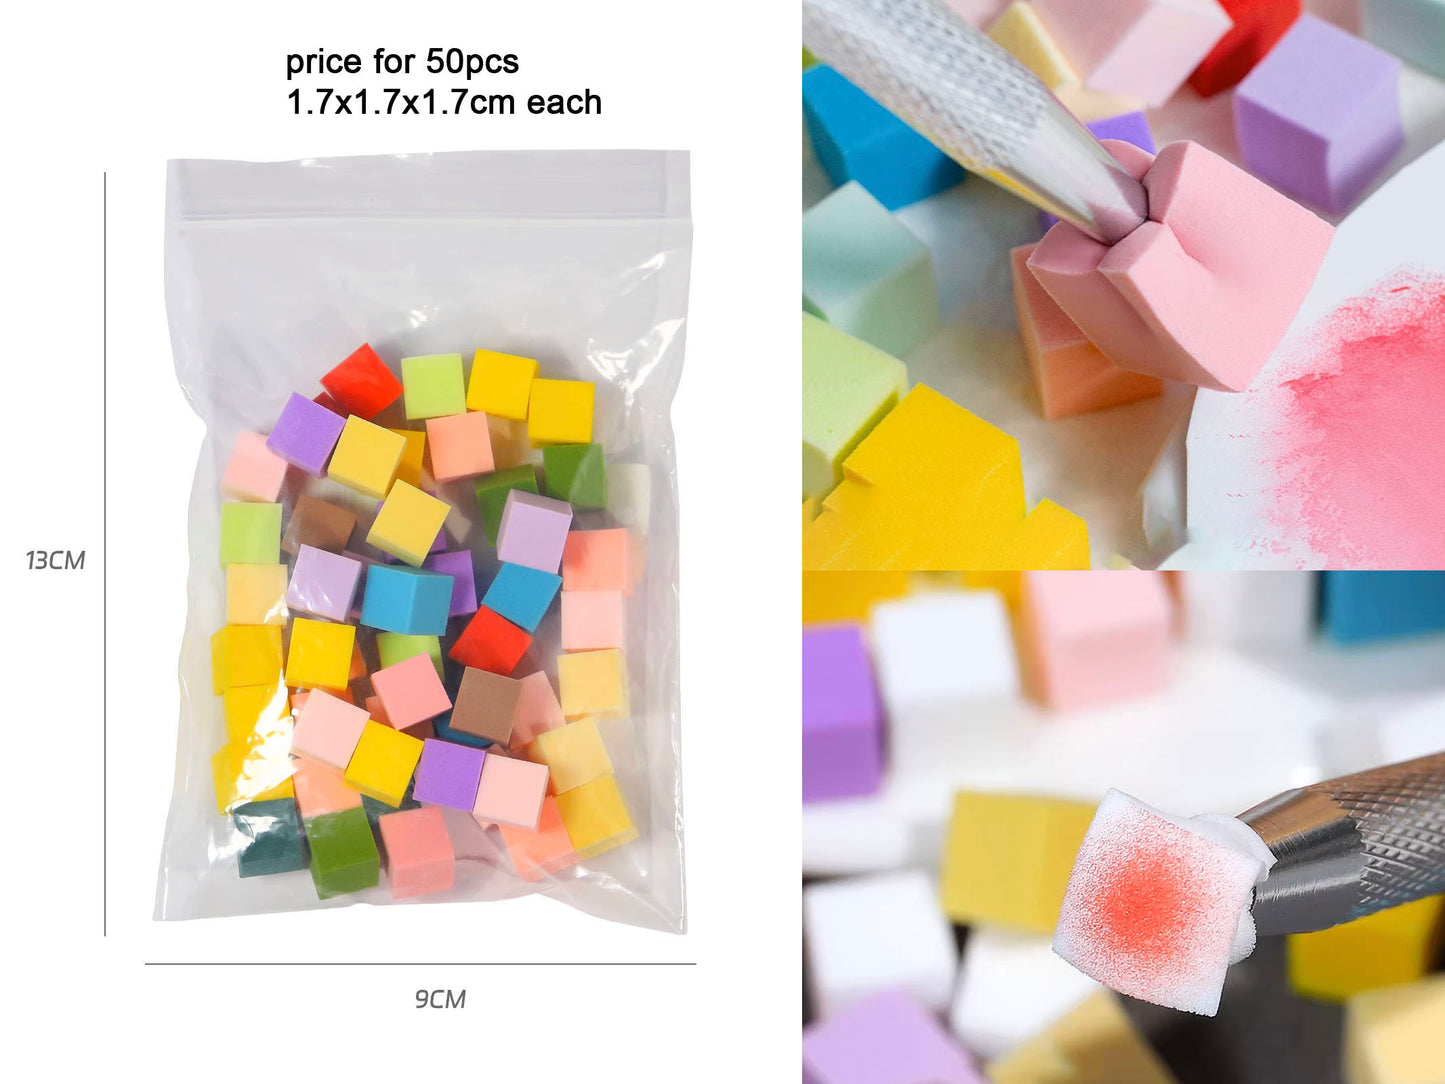 50pcs Tofu Puffs Sponges and Picker for Ombre Gradient Nail Art/ Color Ombré Shade Latex Free Sponge Blocks & Tongs Trendy Nails Tool